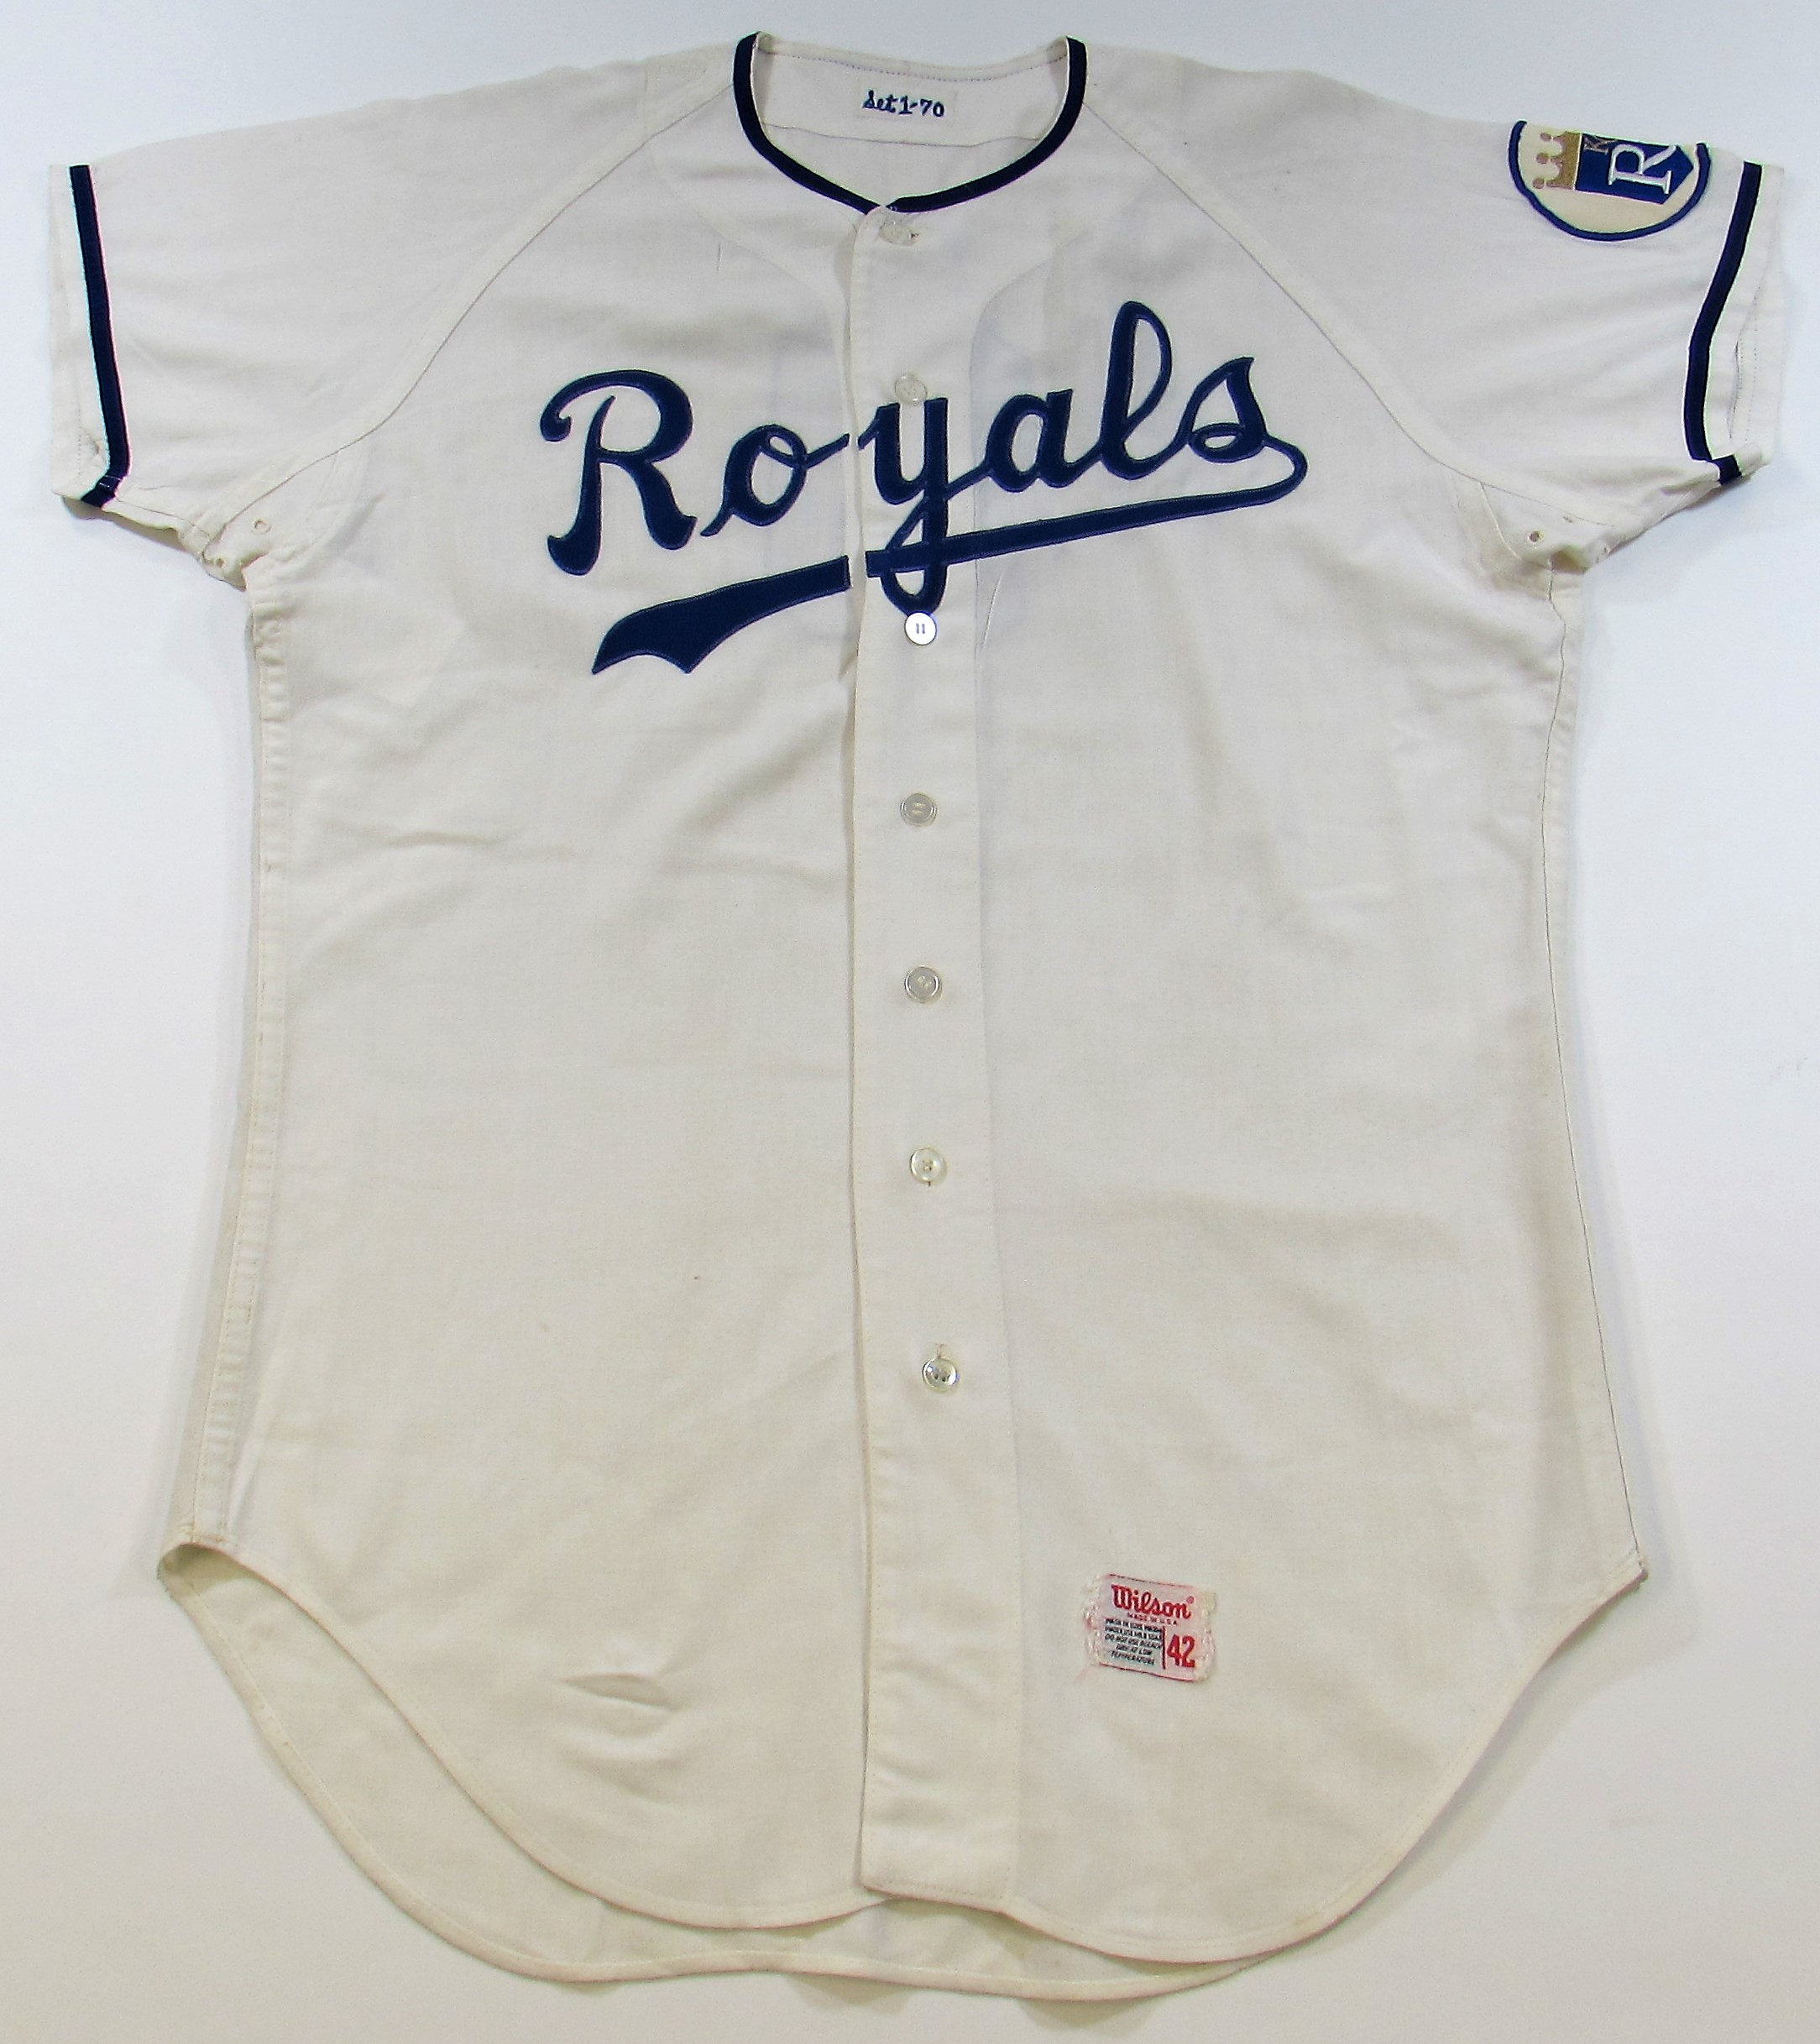 George Brett Autographed and Framed White Kansas City Royals Jersey